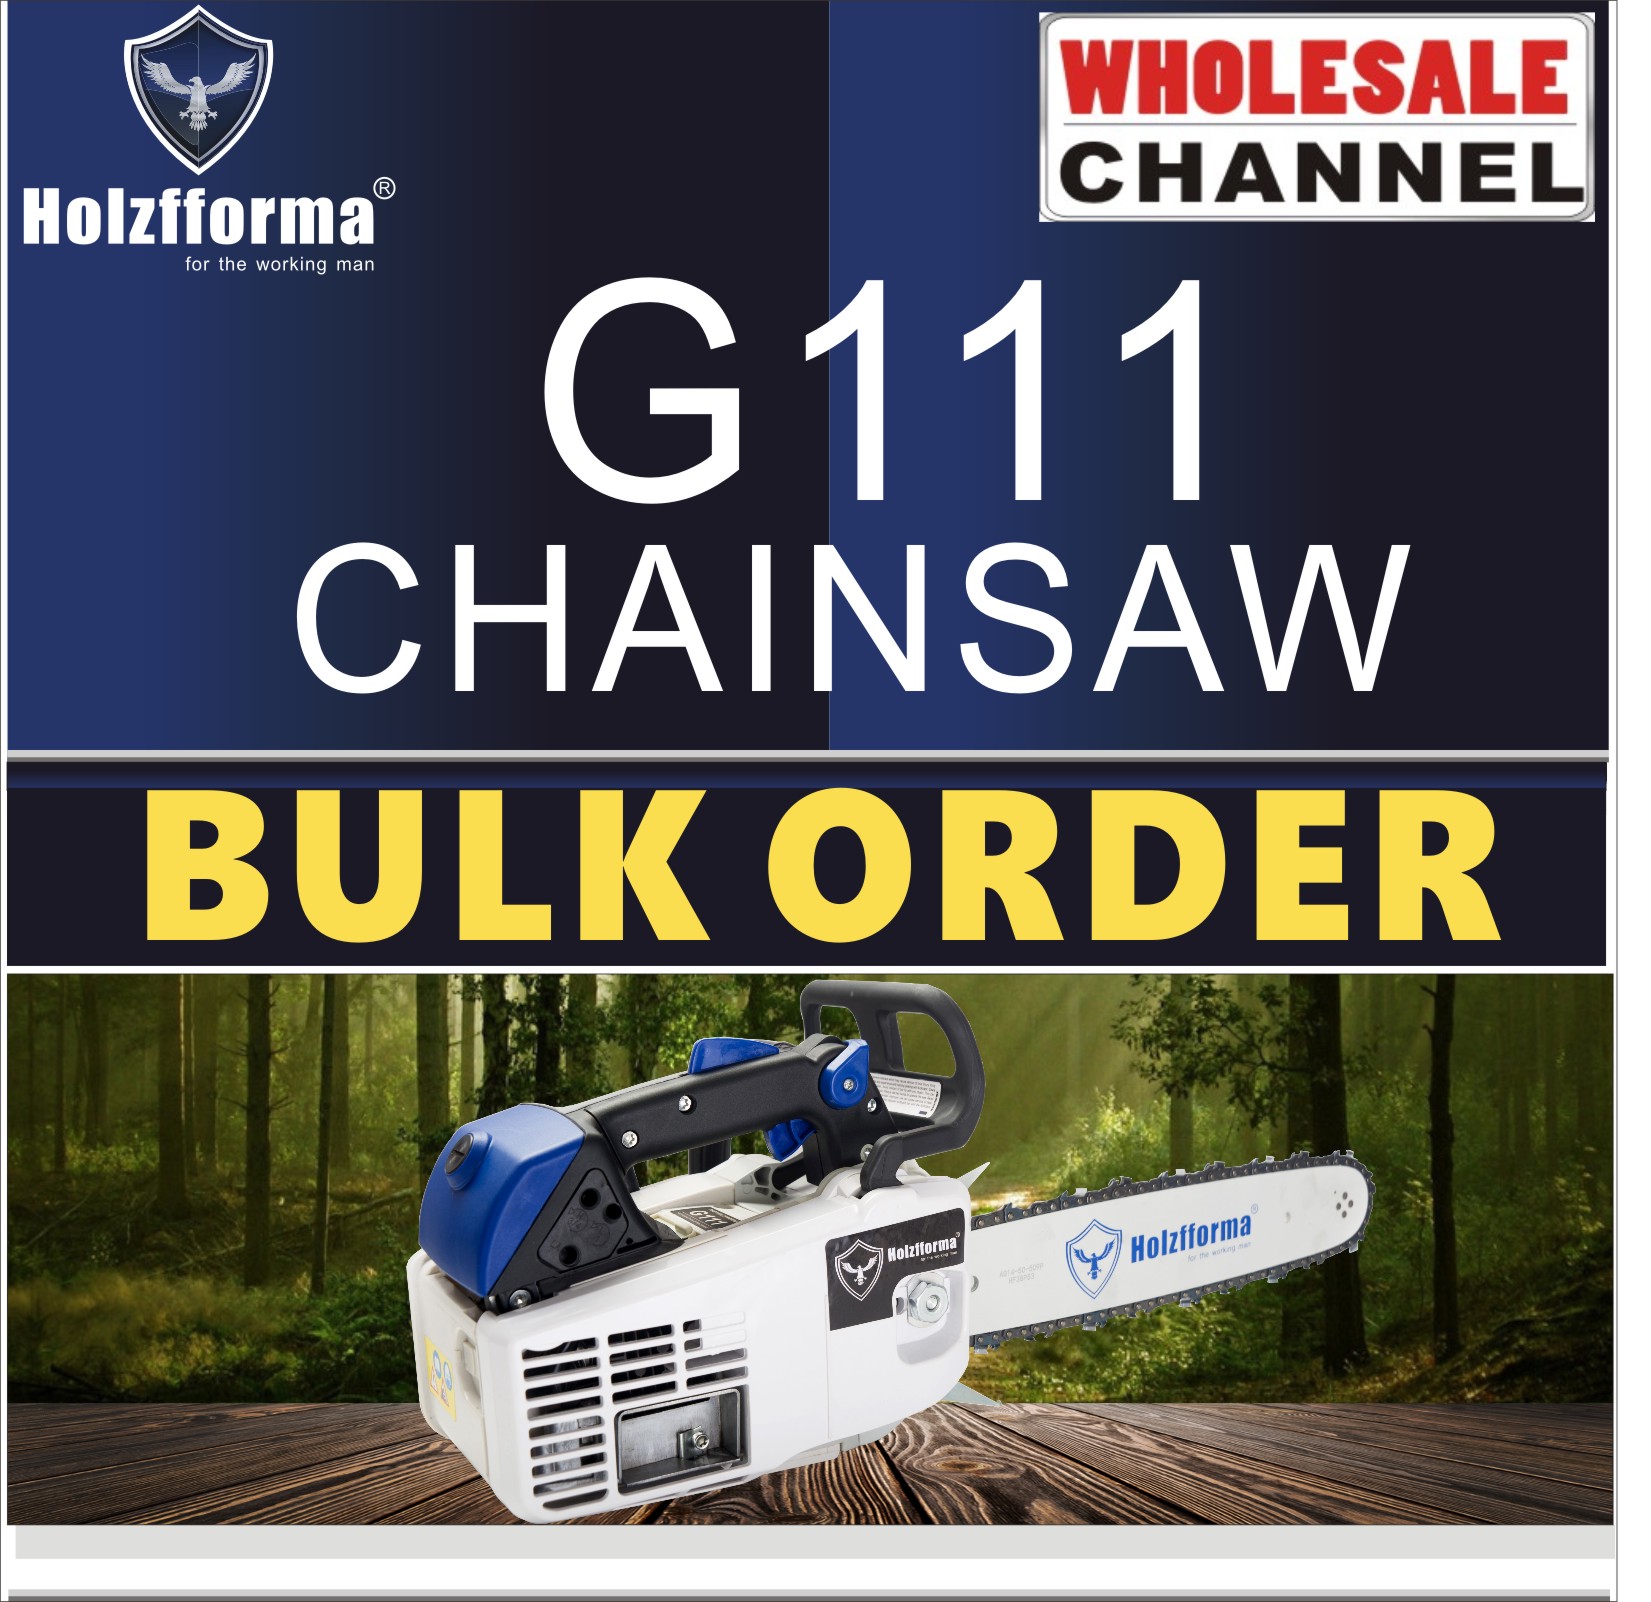 Farmertec Holzfforma G111 MS200T 020T Chainsaw 35.2CC Without Guide Bar Chain